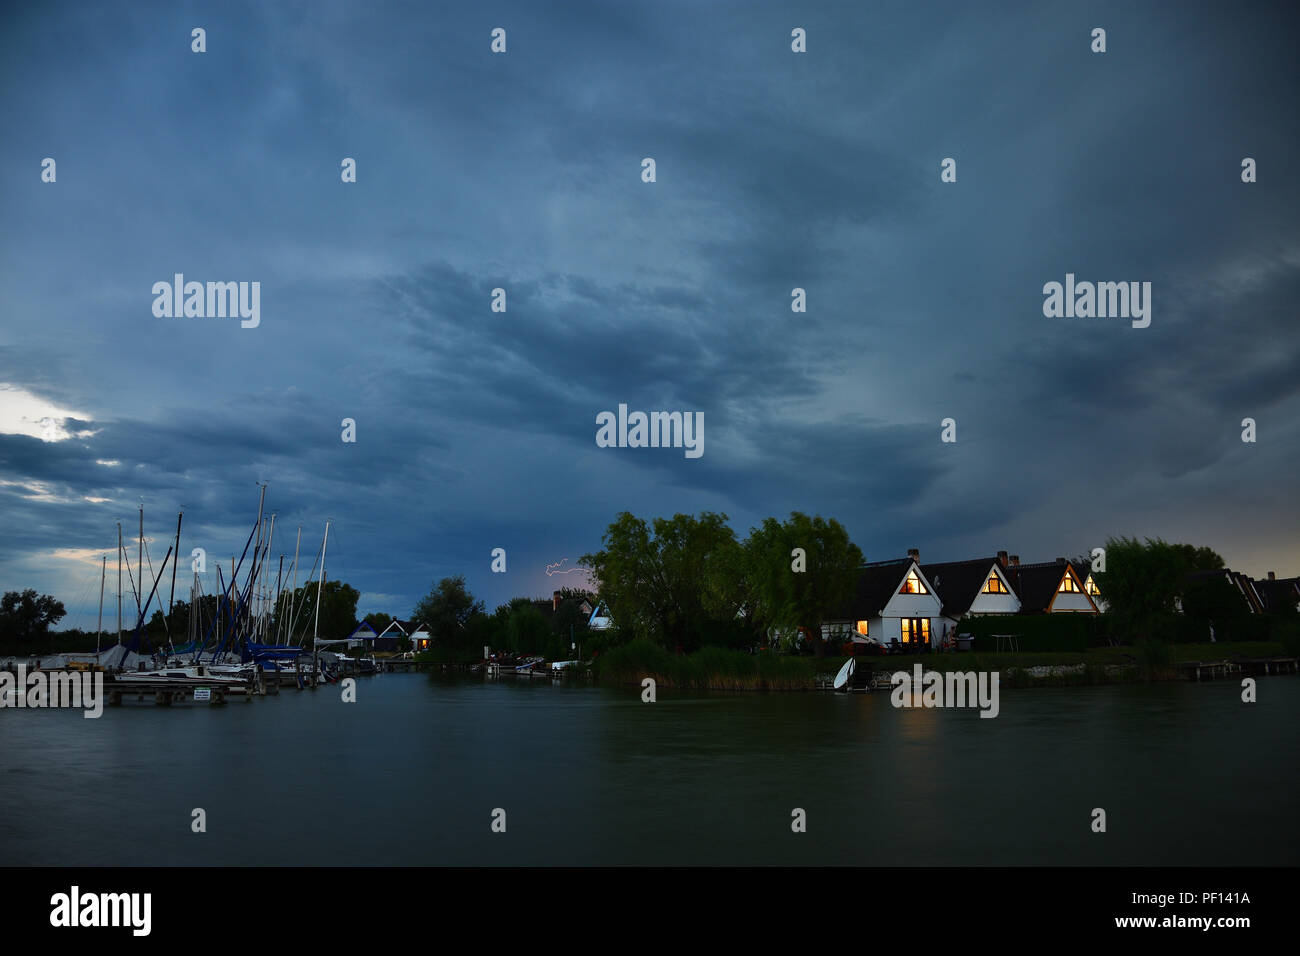 Evening mood with storm cloud over a cottage settlement at Lake Neusiedlersee in Burgenland, Austria. Stock Photo